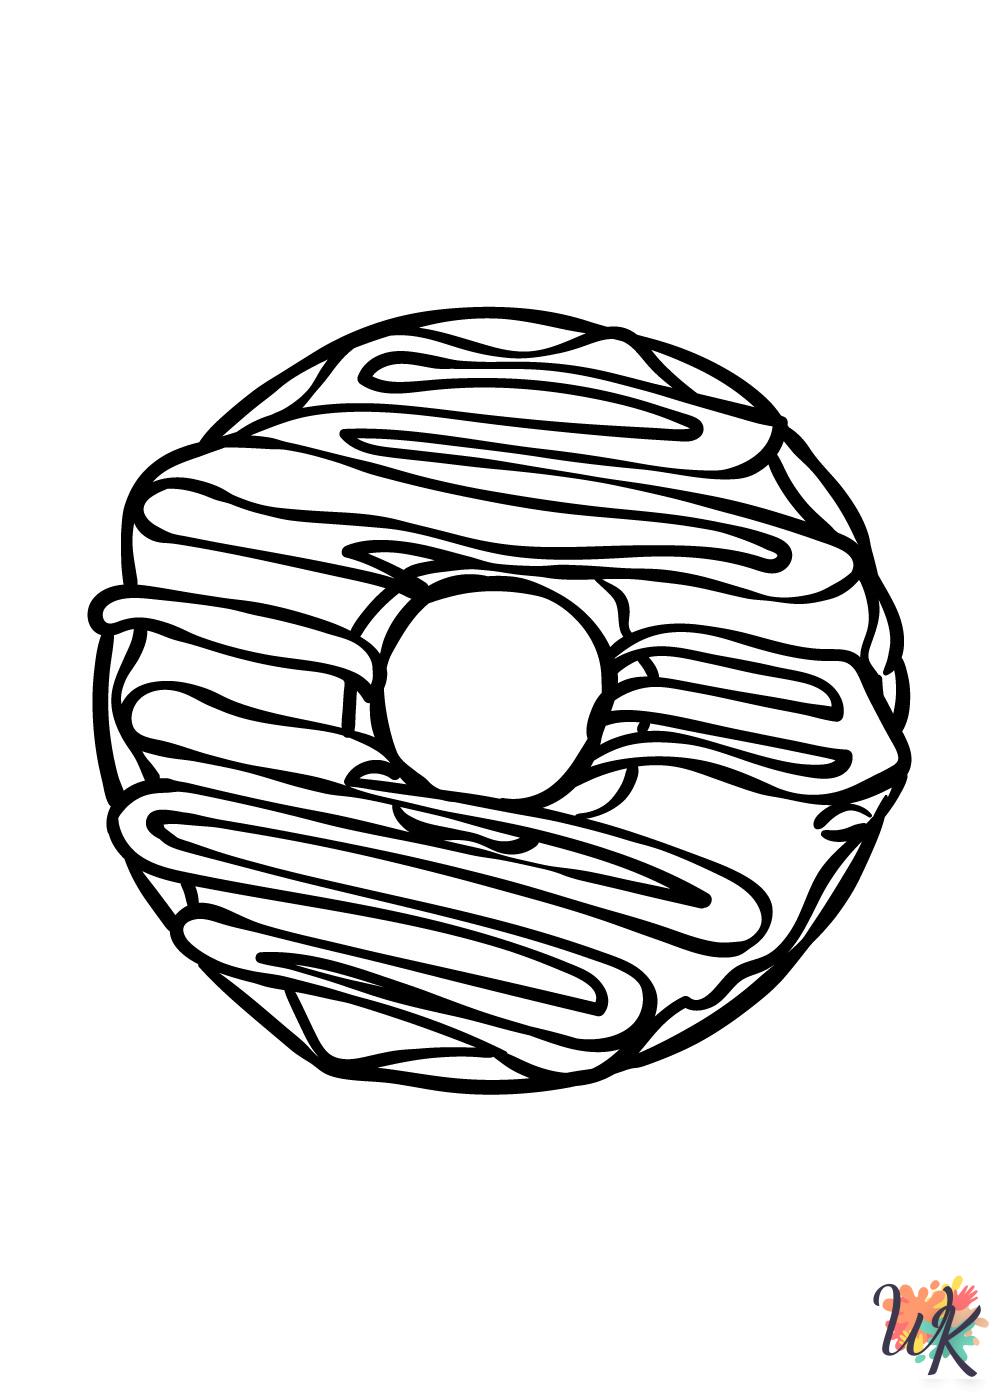 printable Donut coloring pages for adults